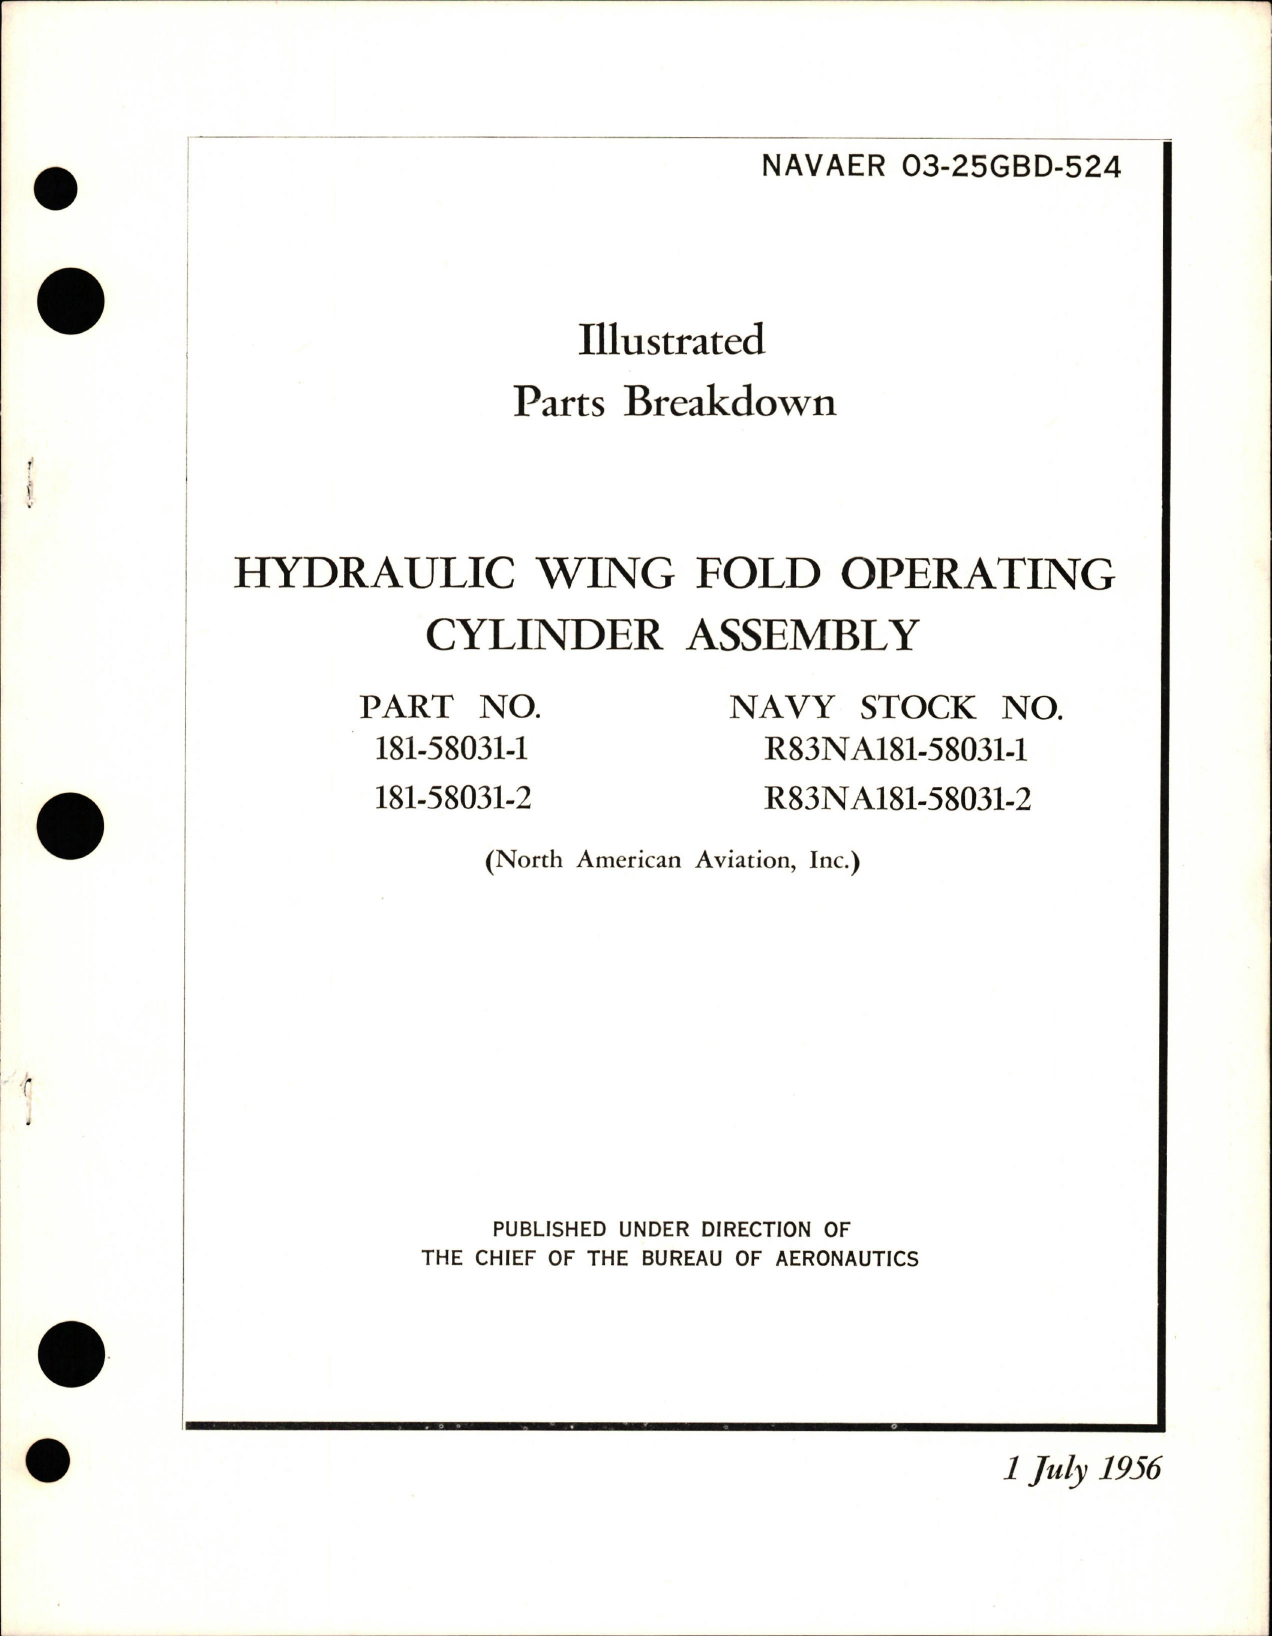 Sample page 1 from AirCorps Library document: Illustrated Parts Breakdown for Hydraulic Wing Fold Operating Cylinder Assembly - Parts 181-58031-1 and 181-58031-2 